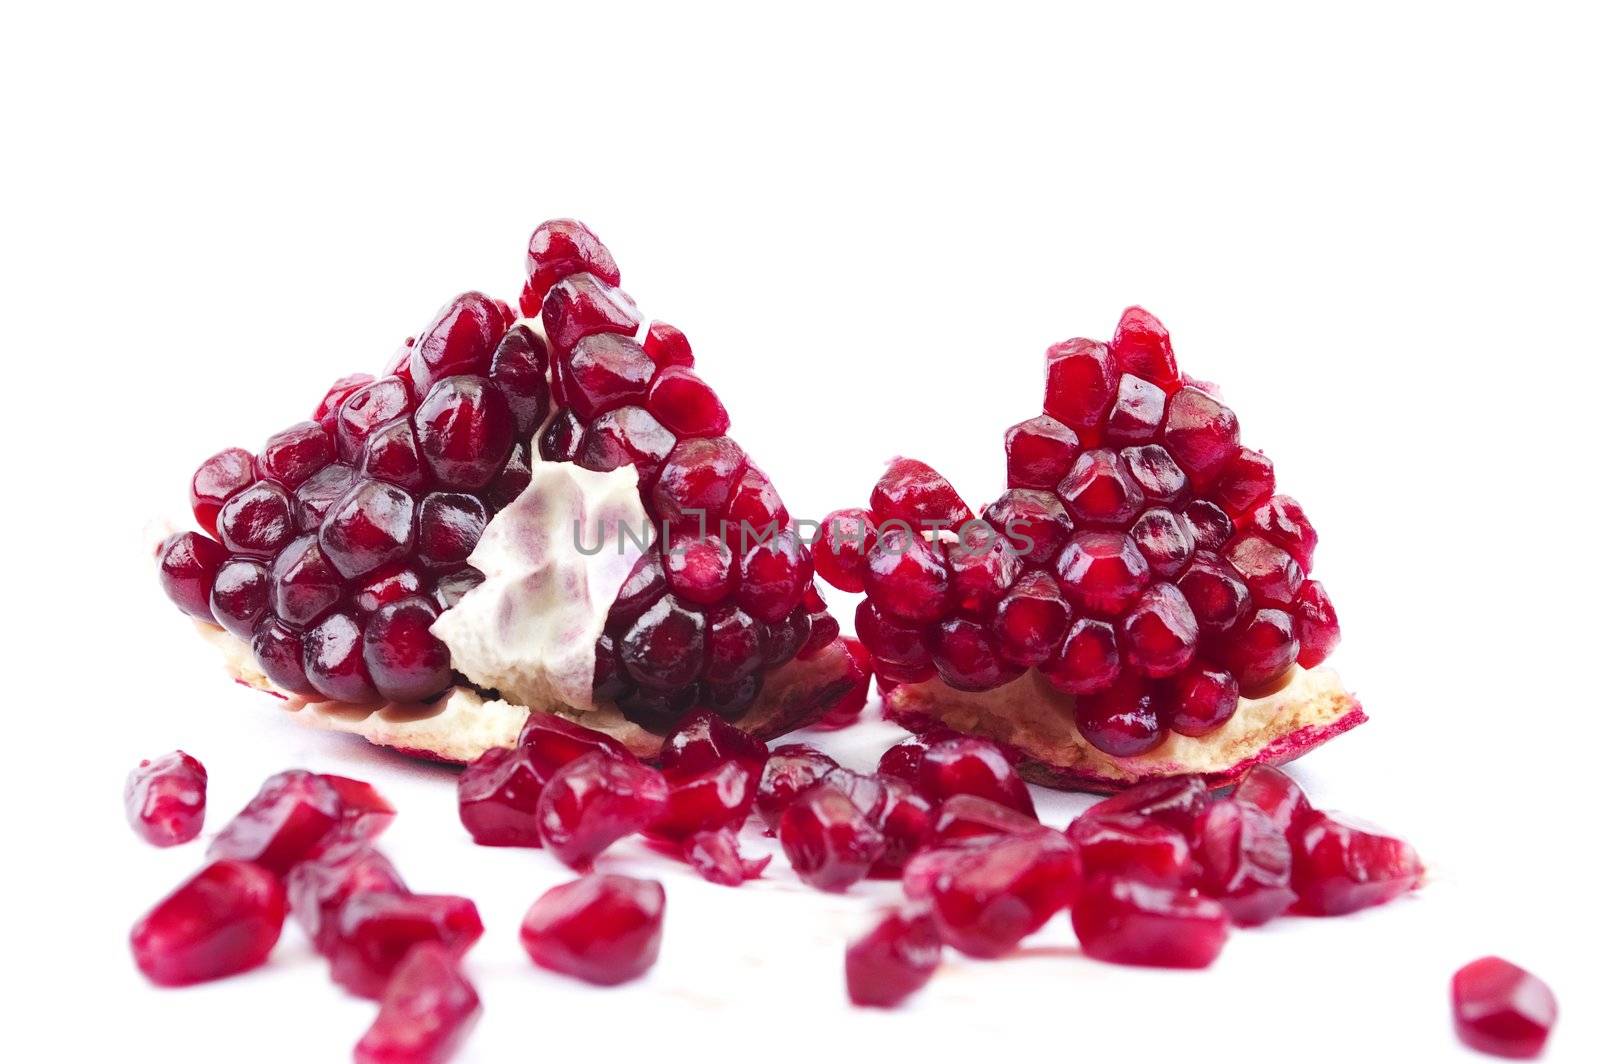 Piece of pomegranate by Triphka